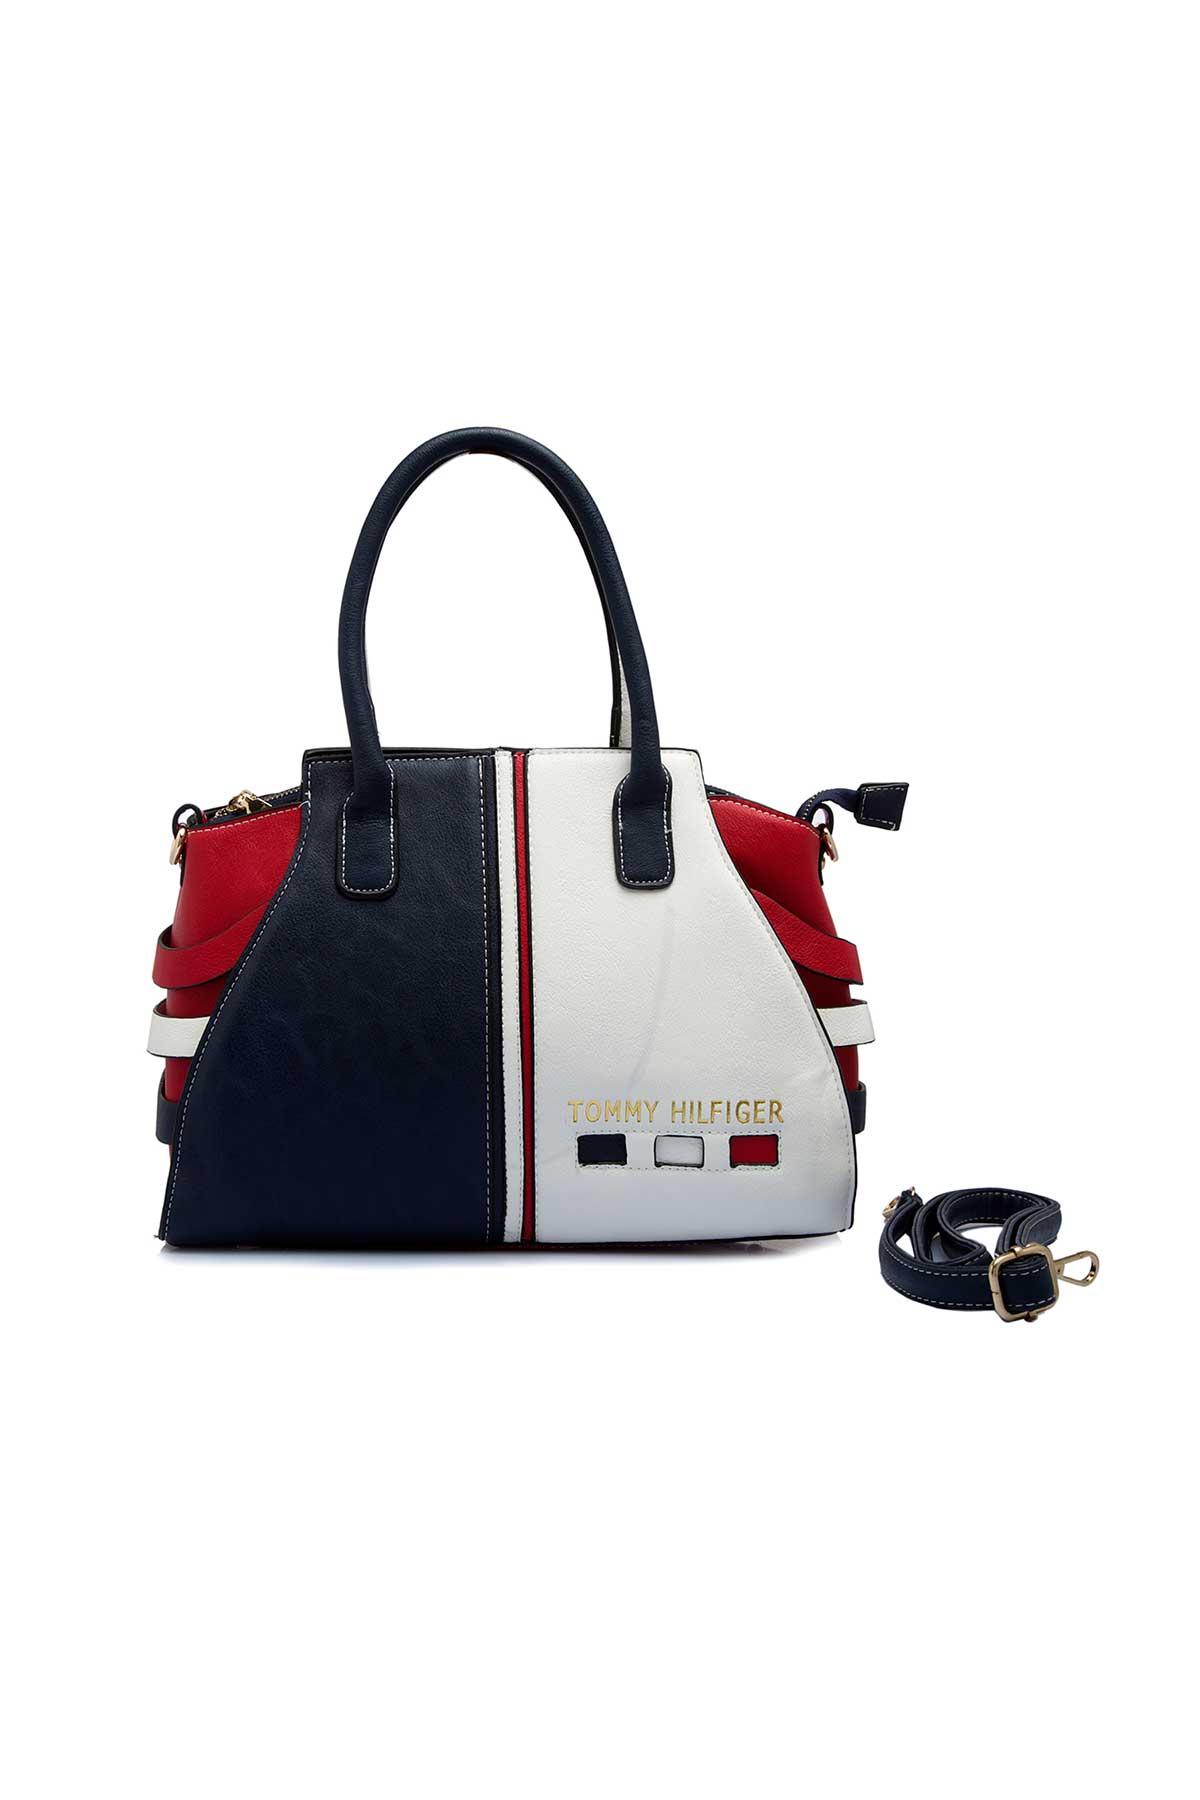 tommy hilfiger bags red and white